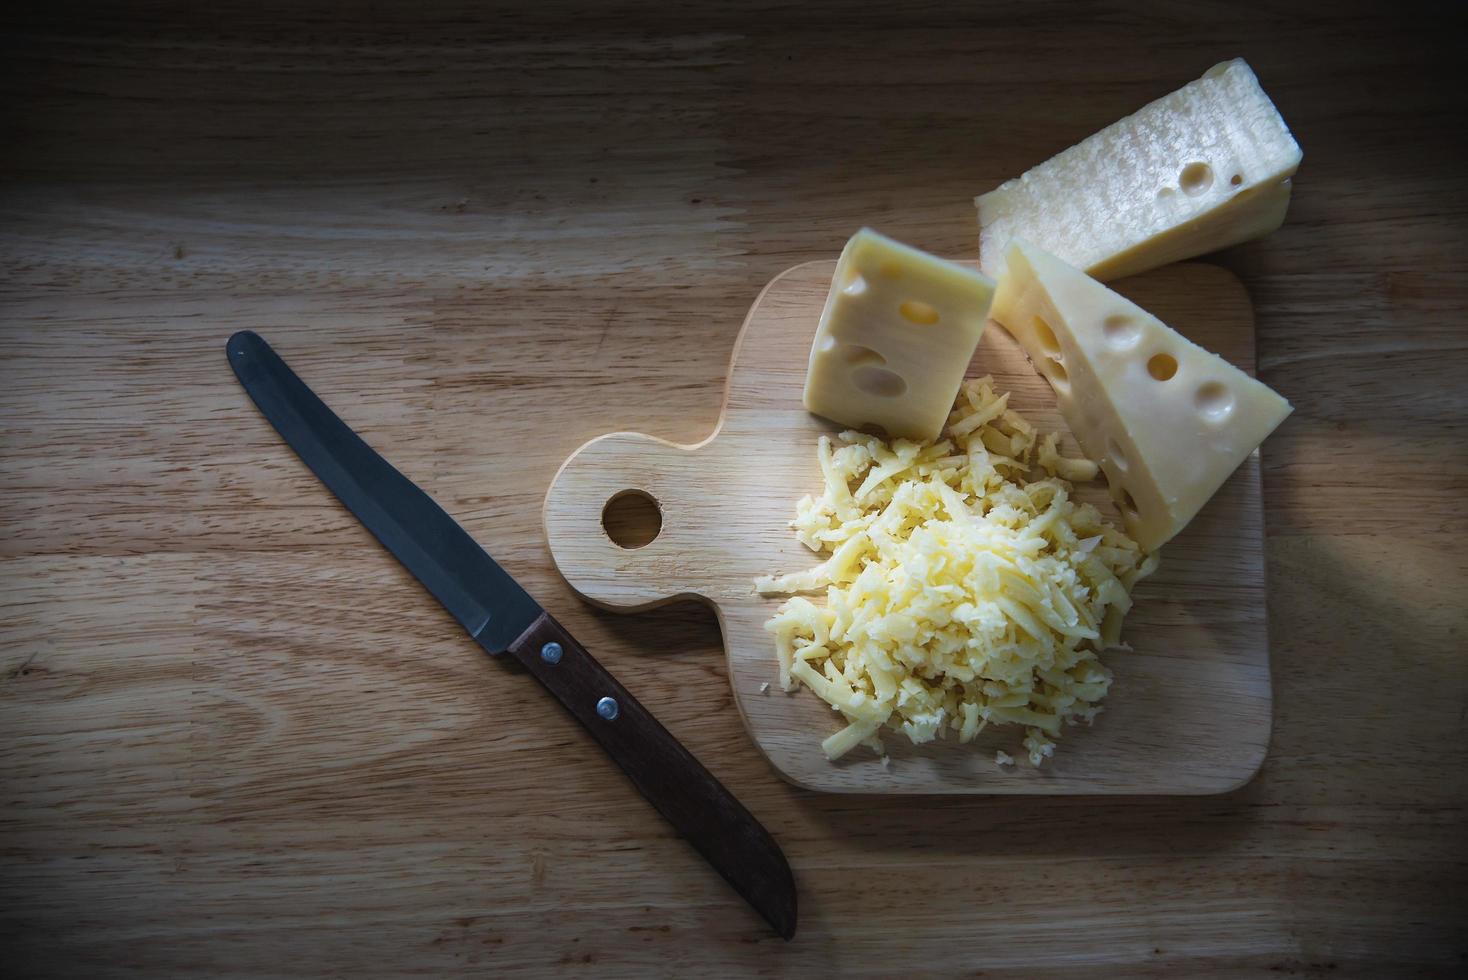 Beautiful cheeses in the kitchen - cheese food preparing concept photo